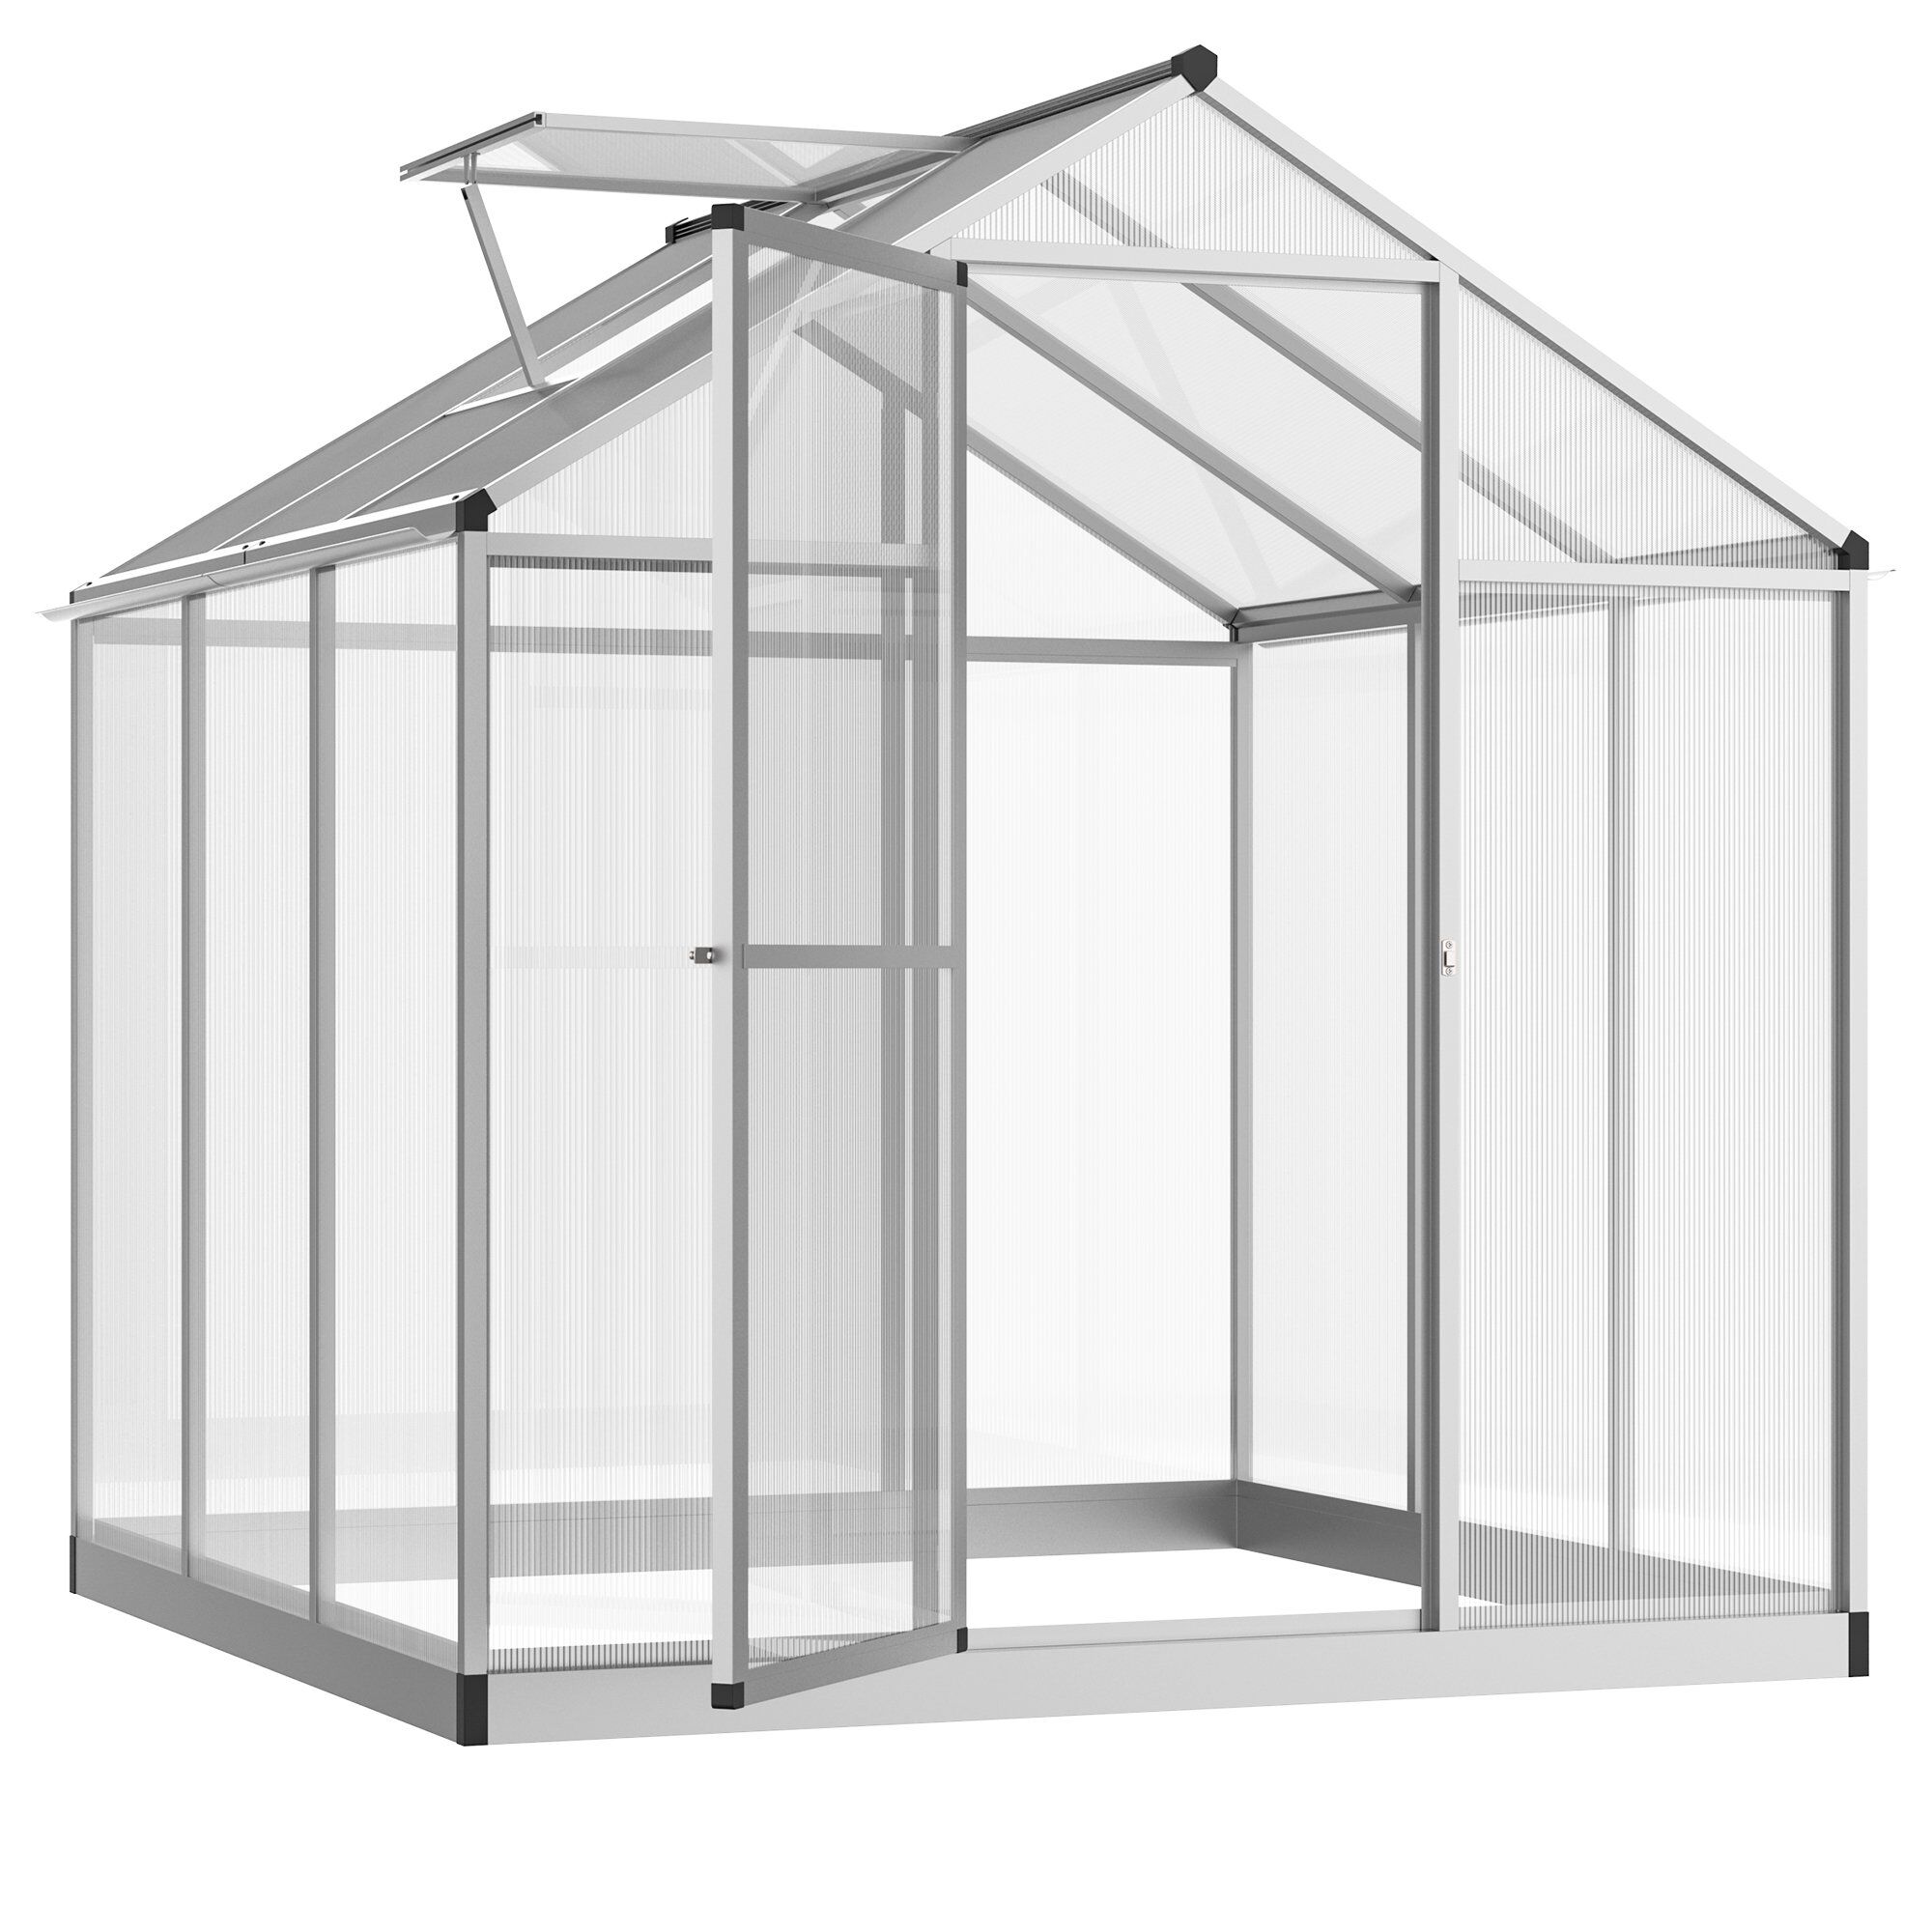 Outsunny Greenhouse Portable Walk-In Greenhouse with Roof Vent and Rain Gutter for Plants, Herbs and Vegetables - 6' L x 6' W x 6.4' H